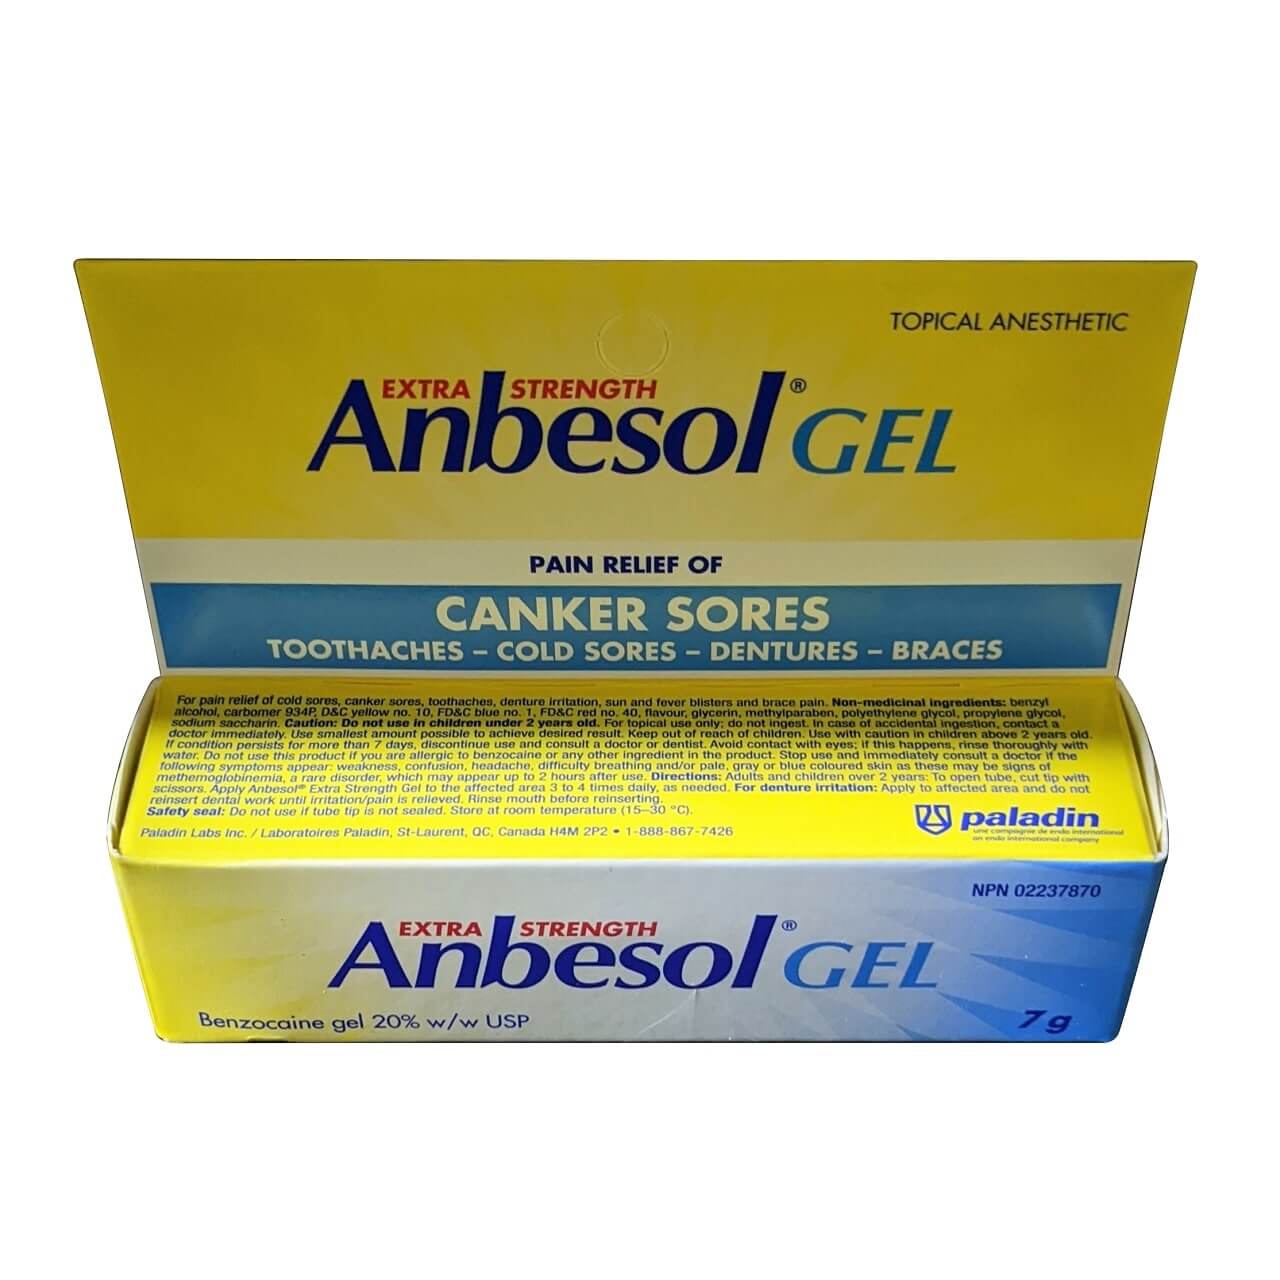 Uses, ingredients, cautions, directions for Anbesol Extra Strength 20% Gel Oral Pain Relief (7 grams) in English